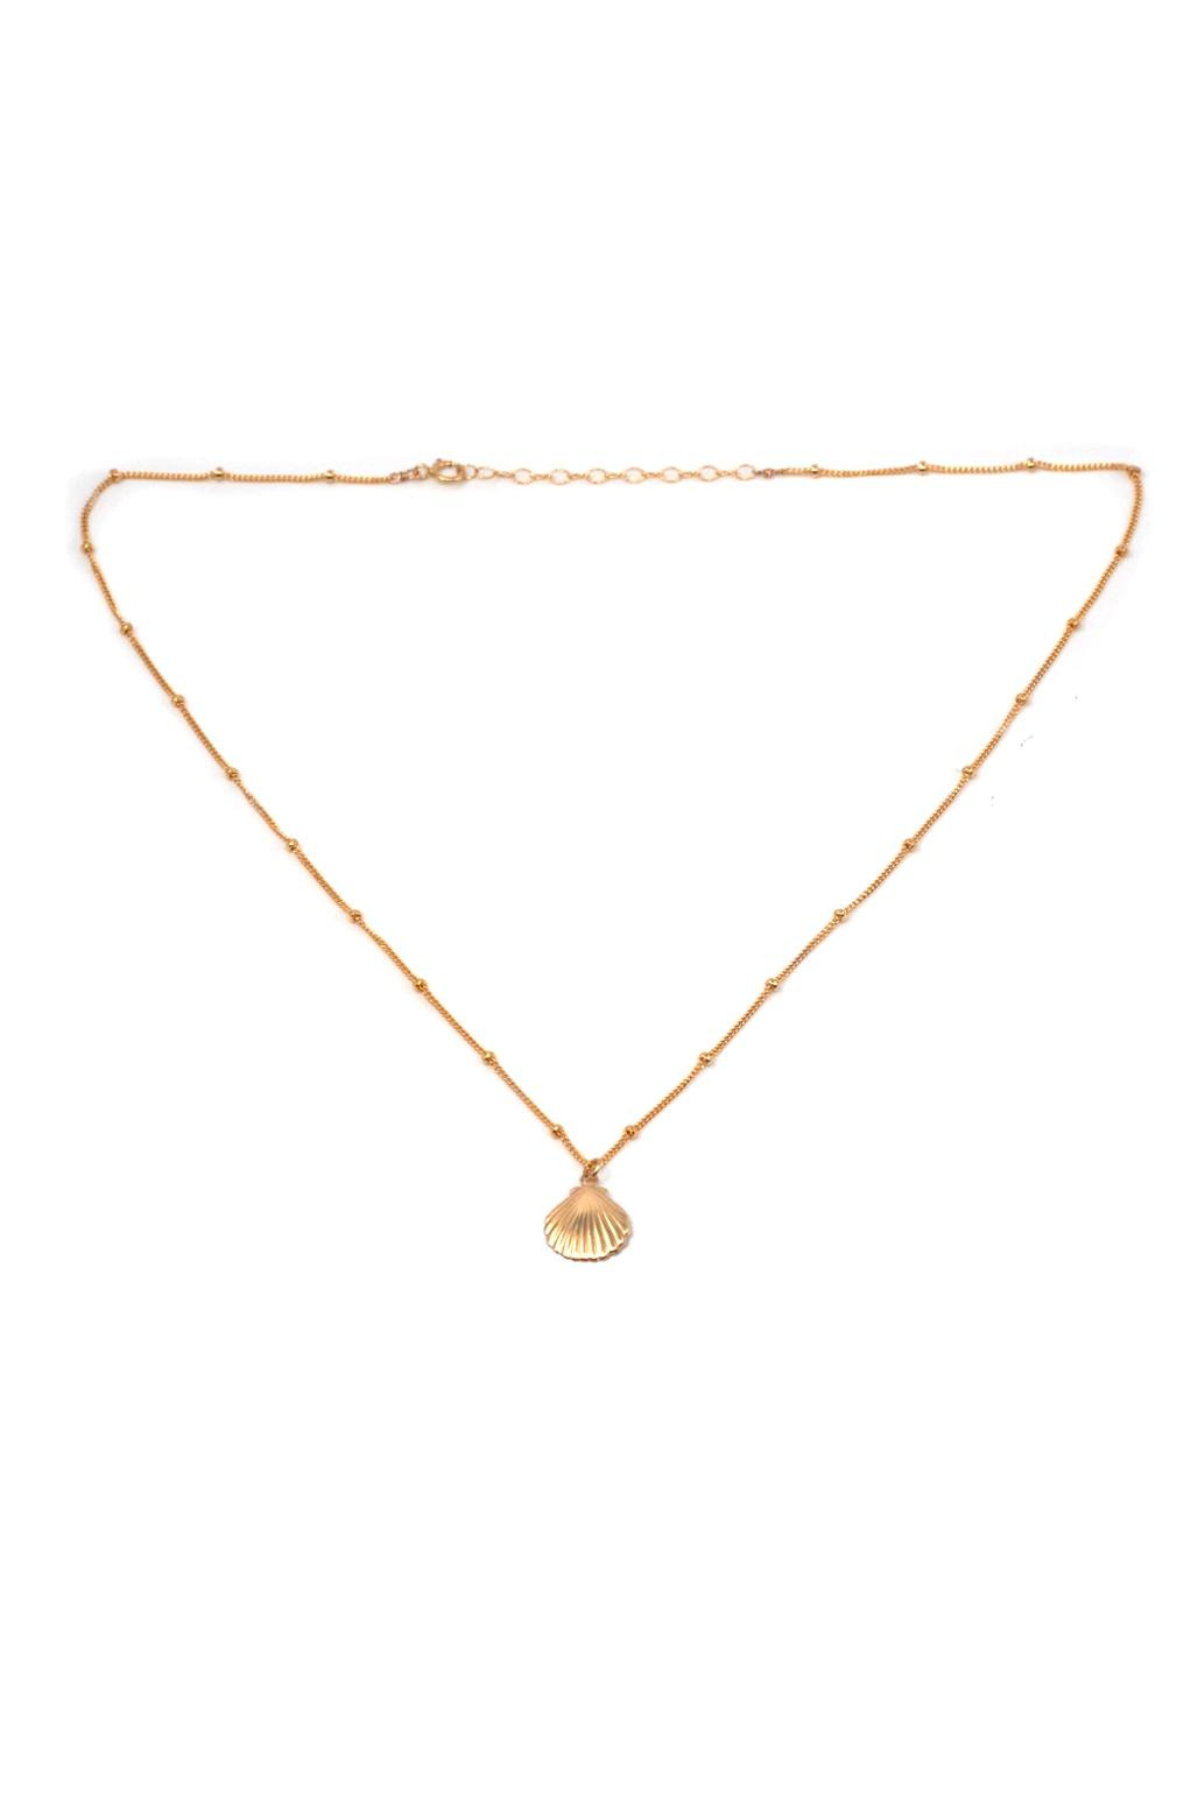 SELAH GOLD FILLED SEASHELL NECKLACE